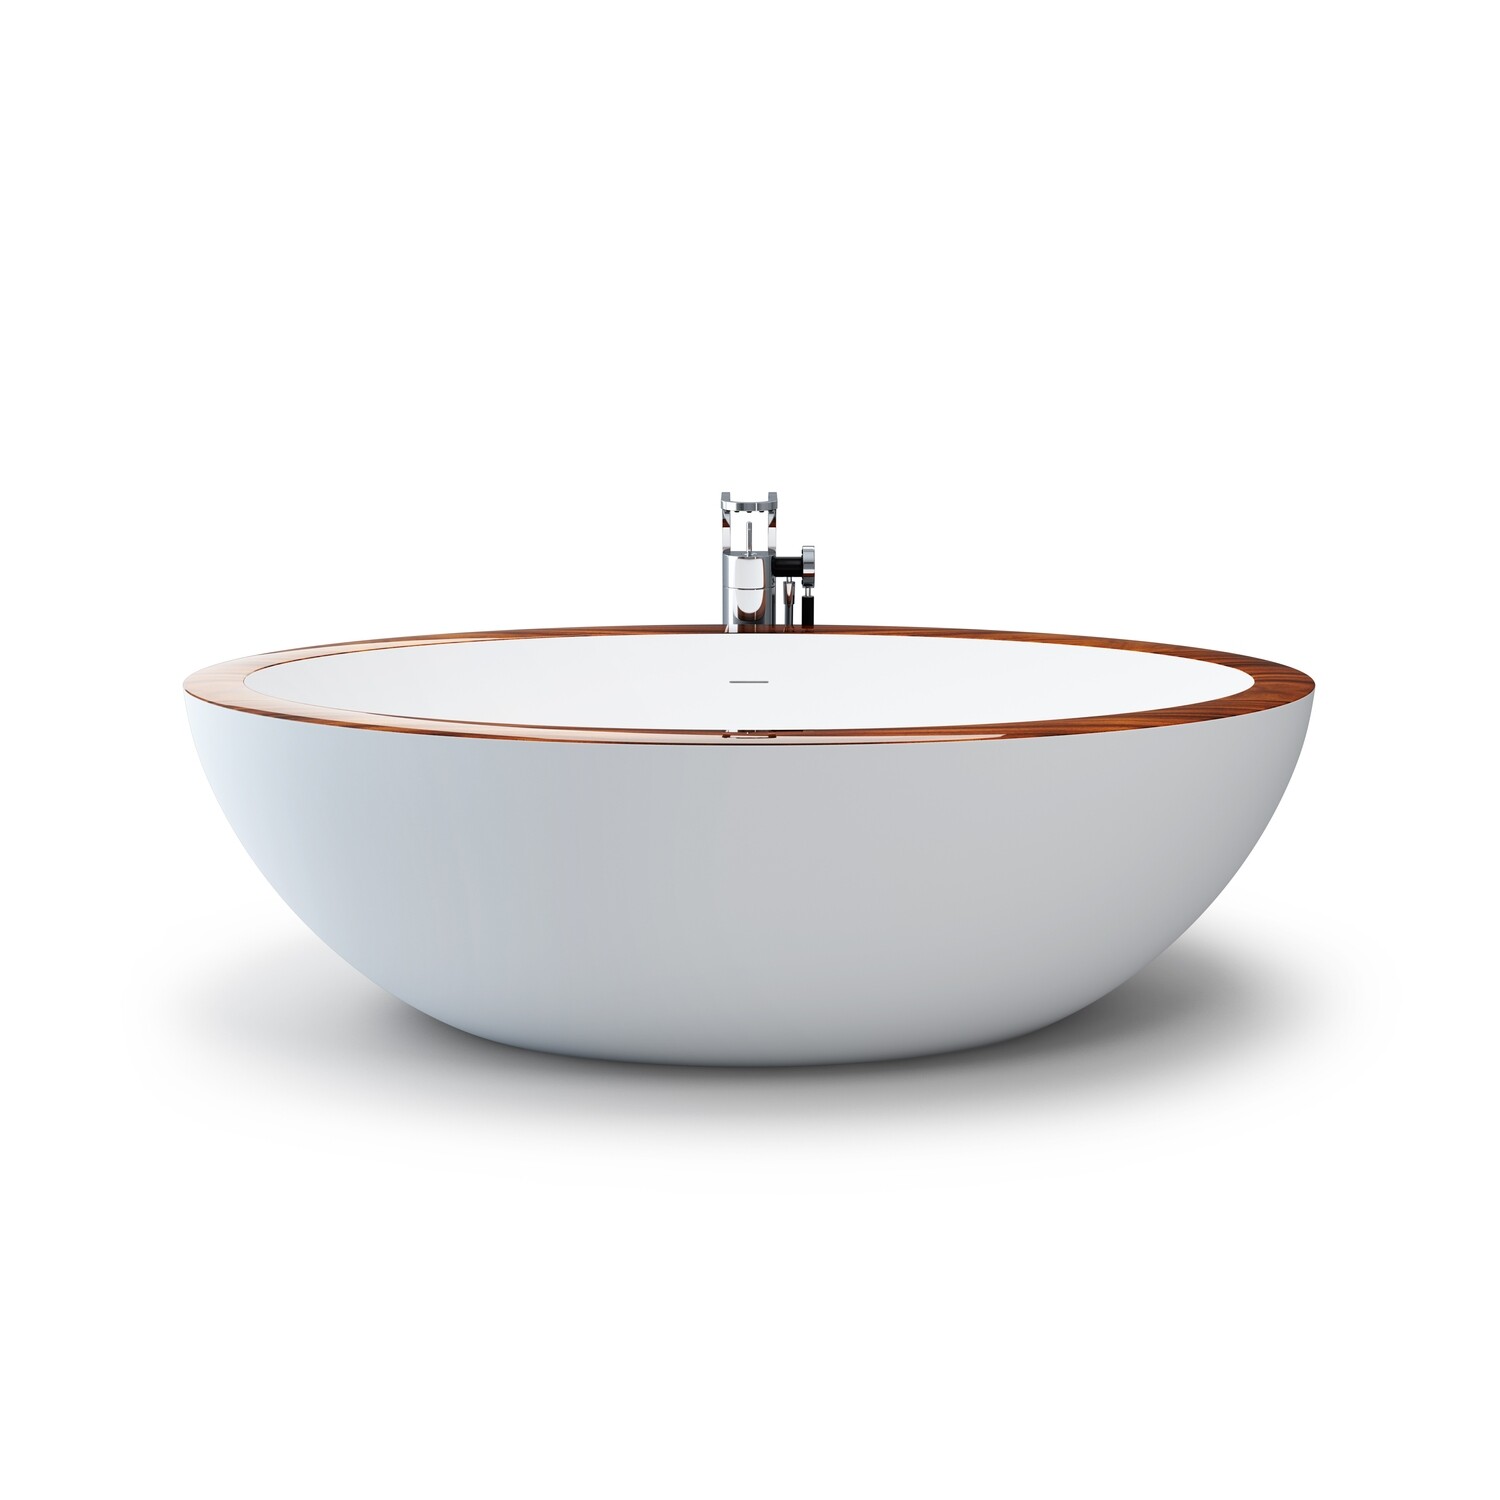 Freestanding bathtub in mineral cast and Santos rosewood